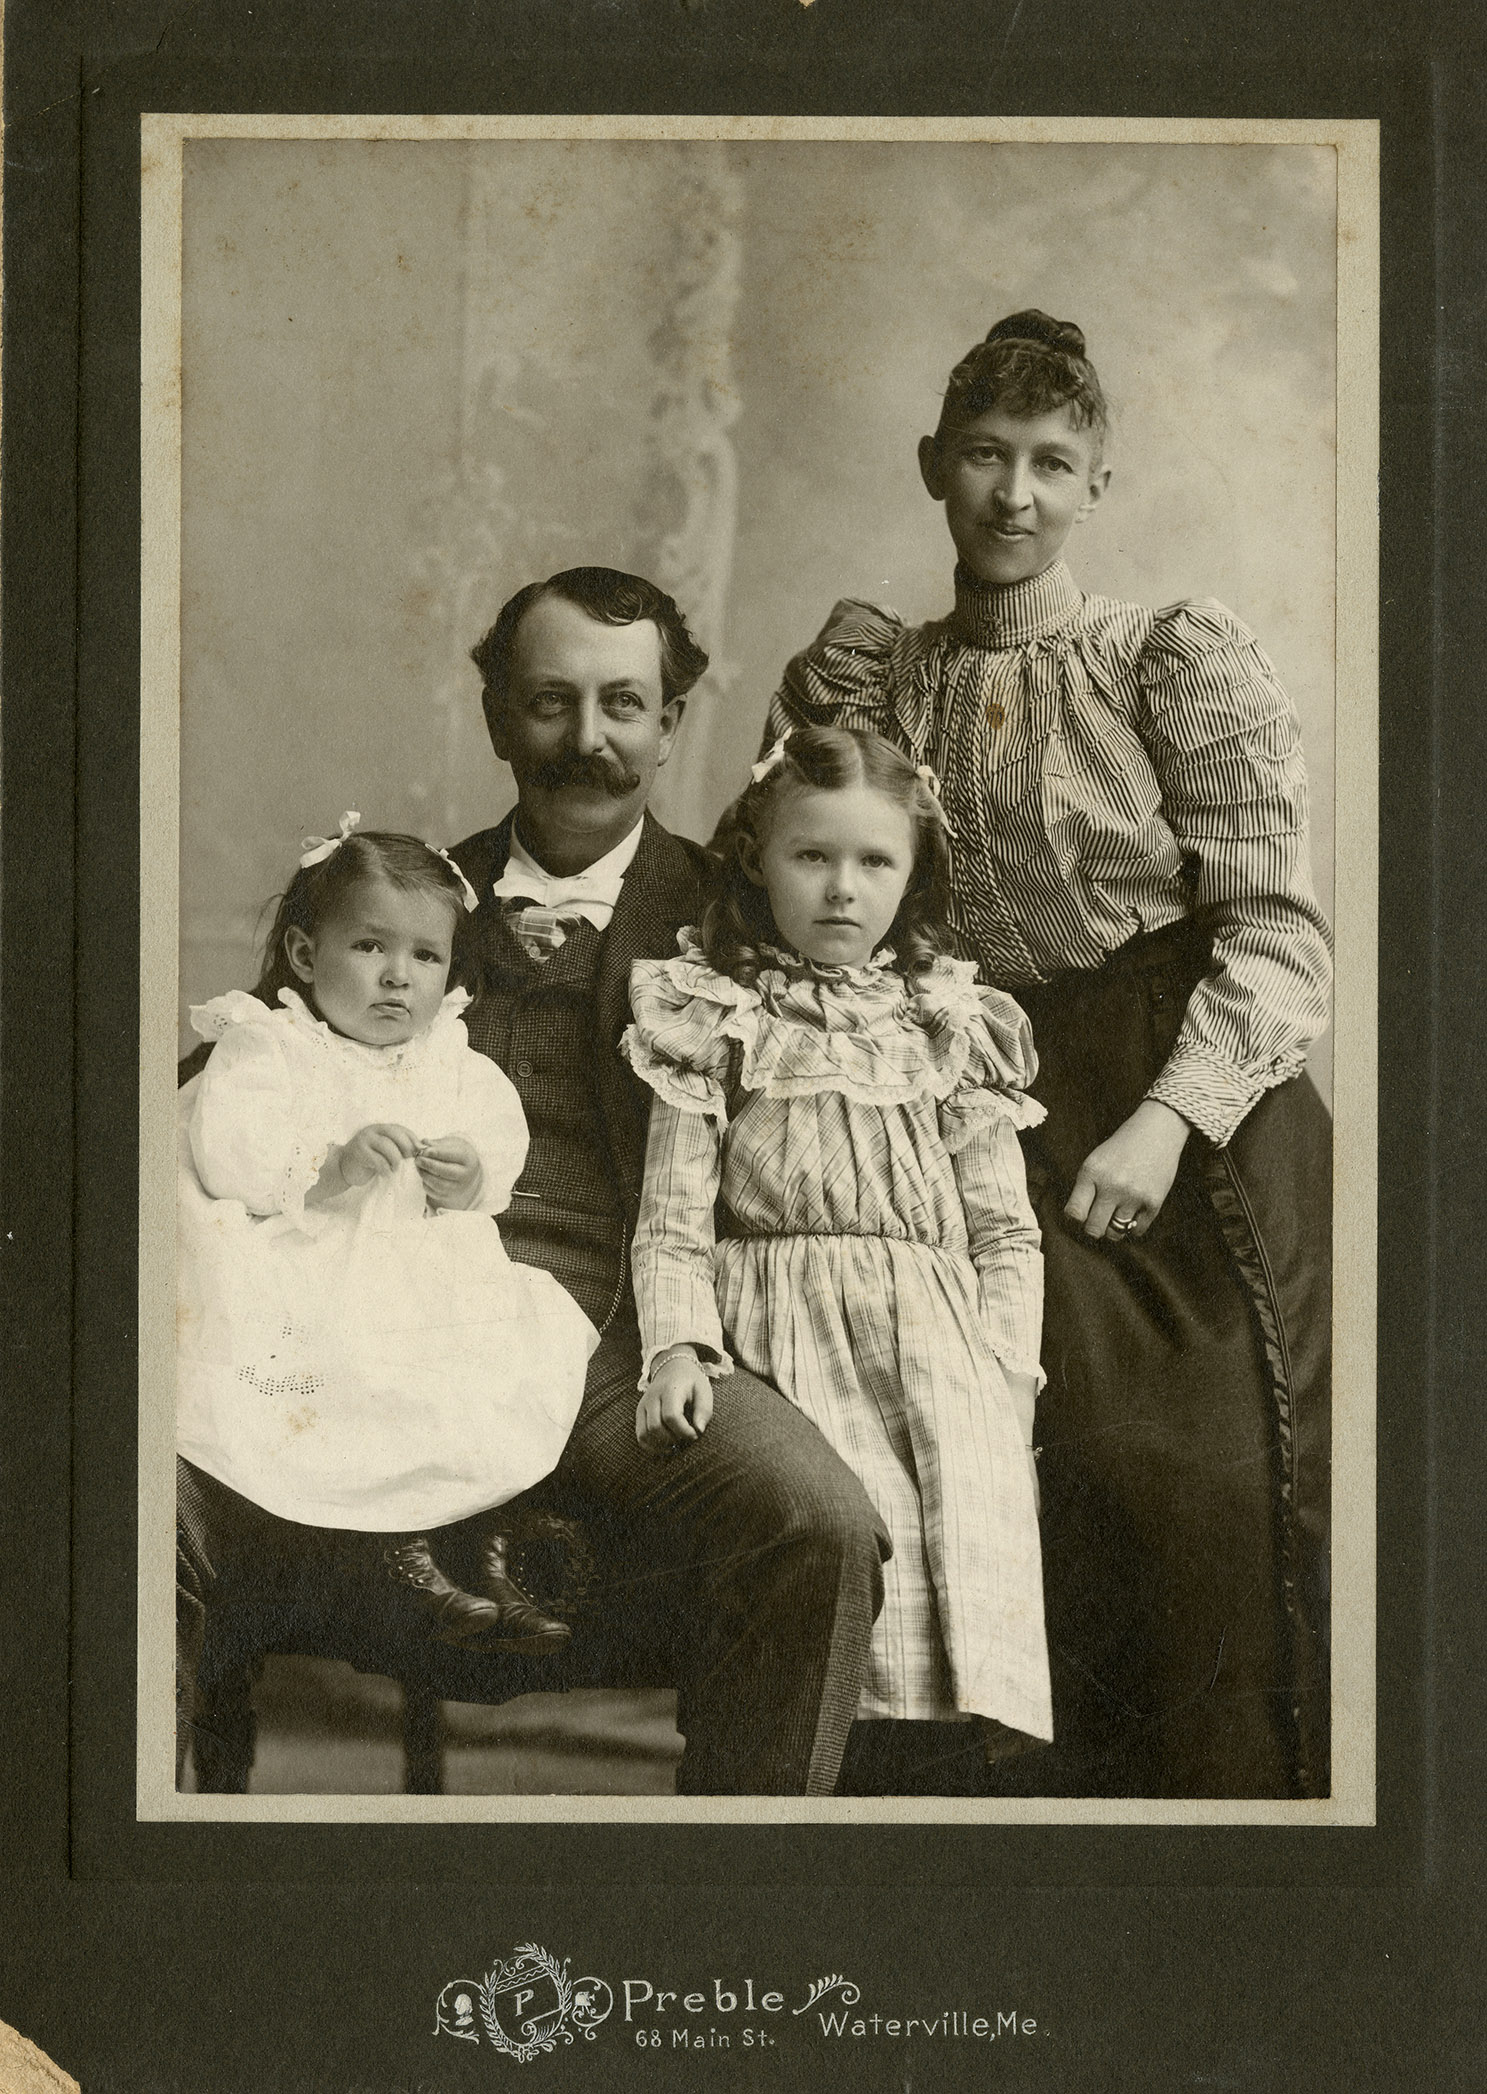 Card-mounted albumen print of a family, 1870-1890 (Human Development and Family Studies Photograph Collection)